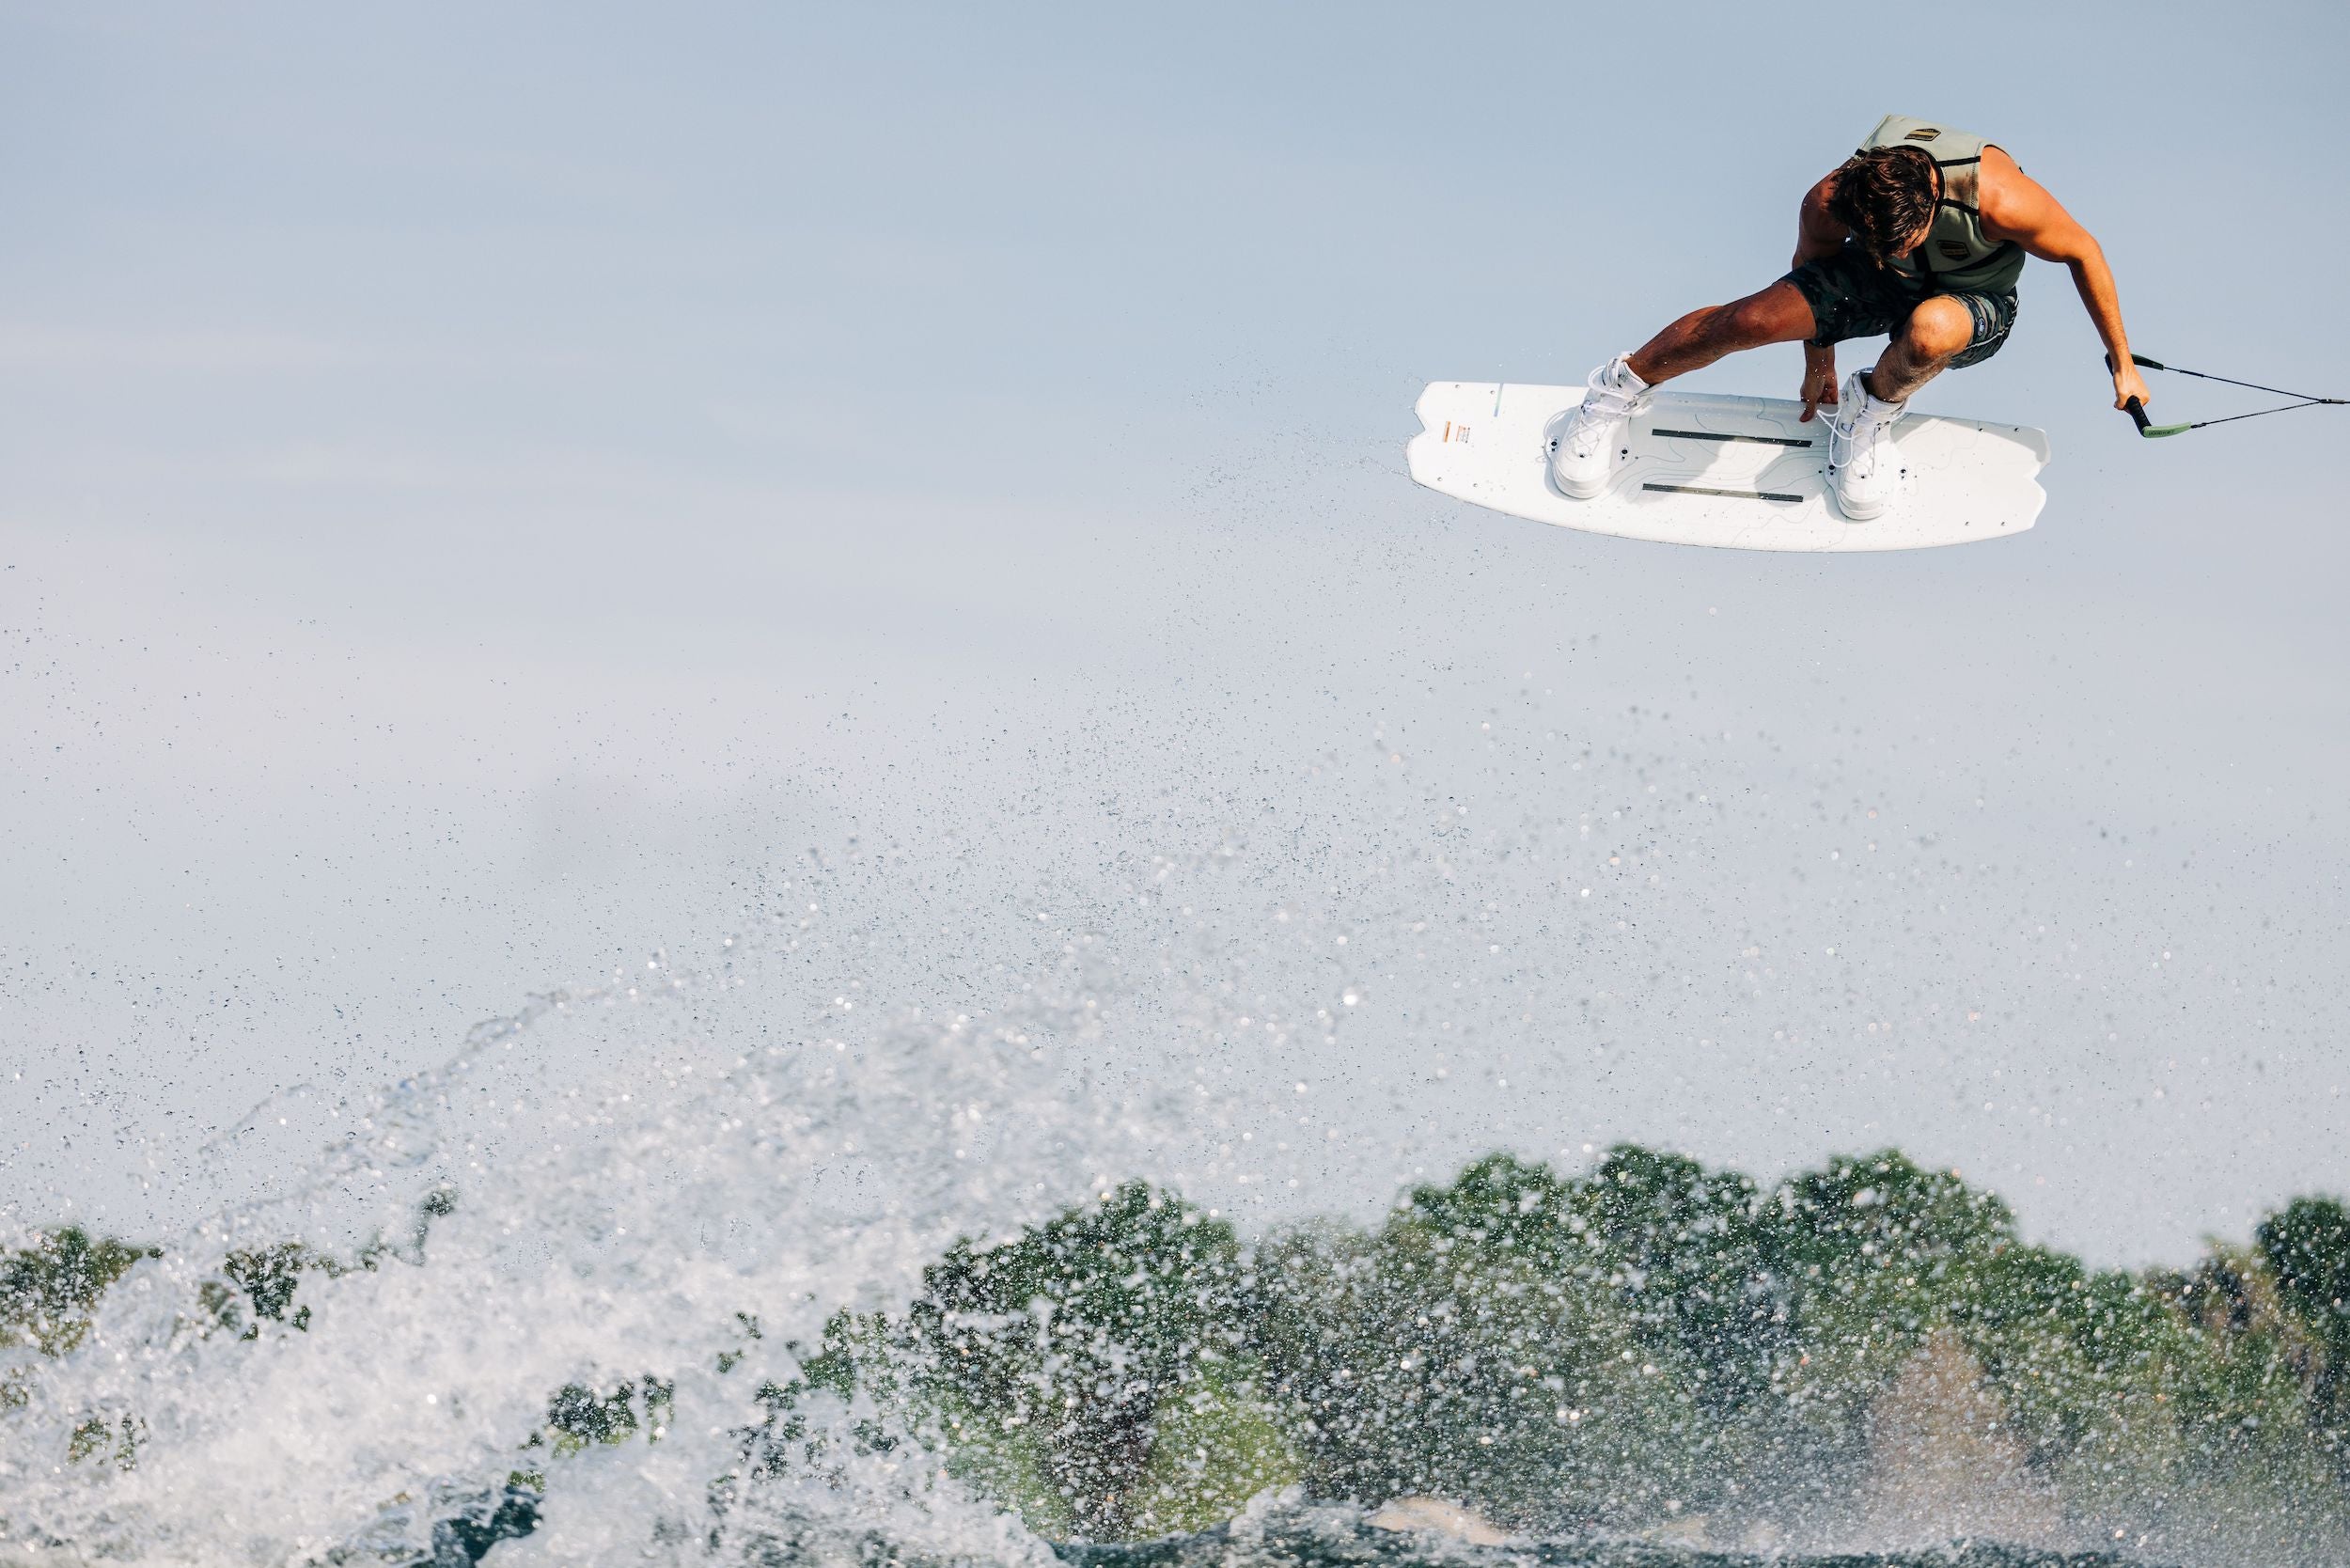 Harley Clifford, a professional wakeboarder, is effortlessly soaring through the air on his Liquid Force 2023 Remedy Aero wakeboard. This high-performance board is not only lightweight but also provides him with the perfect balance and stability for executing tricks.